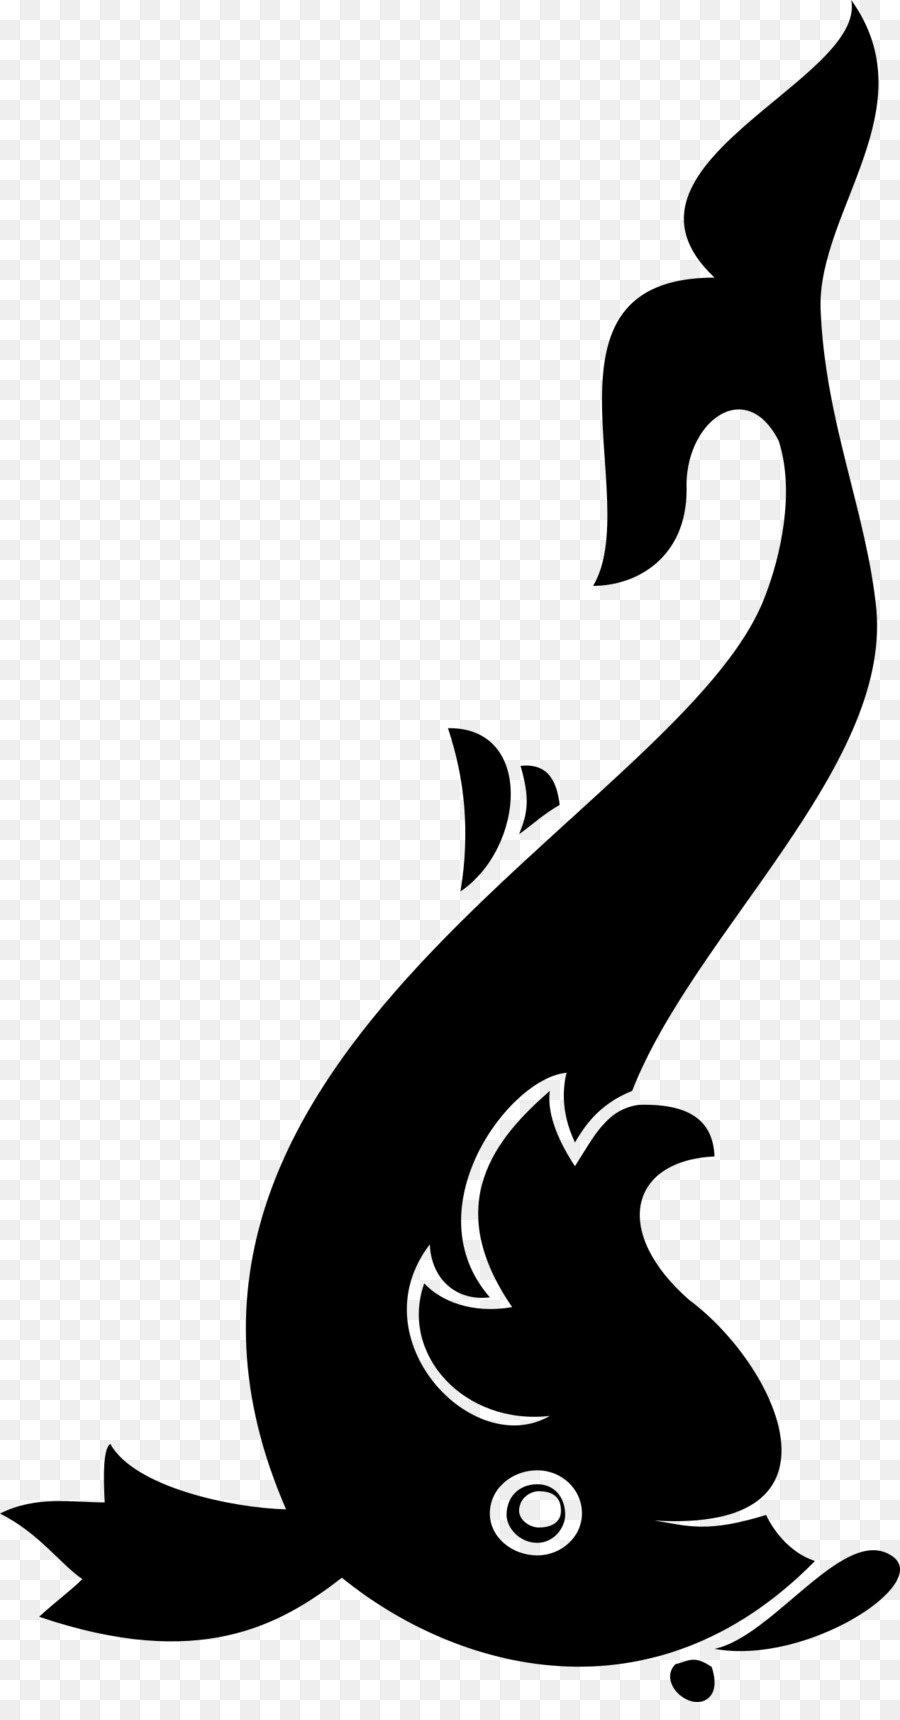 Marine mammal Silhouette Dolphin Clip art - Silhouette png download - 1269*2400 - Free Transparent Marine Mammal png Download.